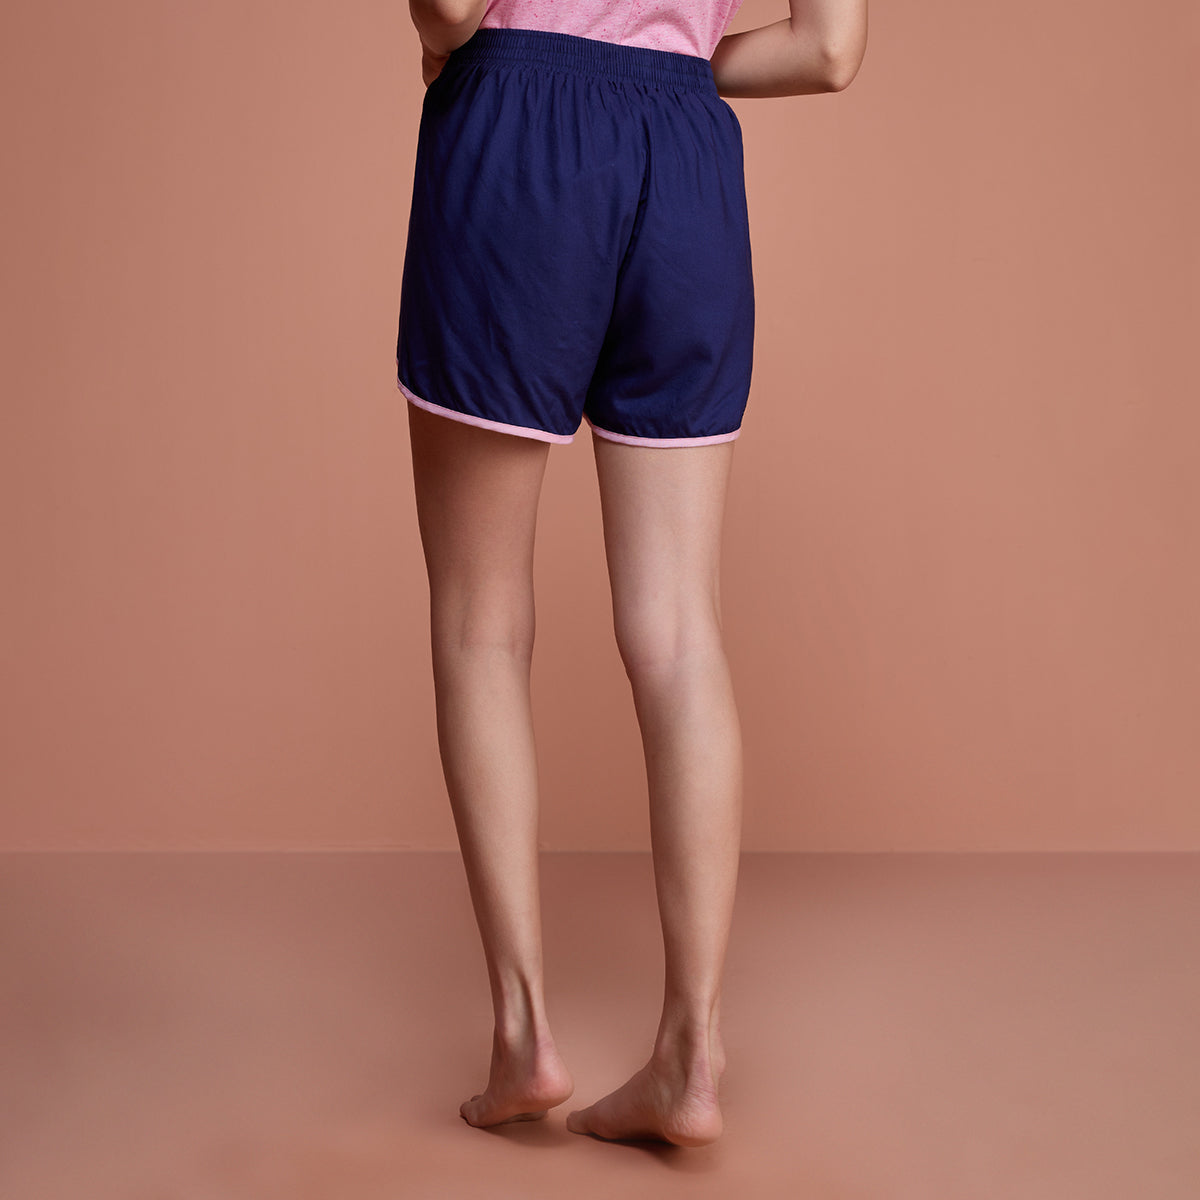 Sleep In Step Out Shorts  - NYS135 - Midnight Blue